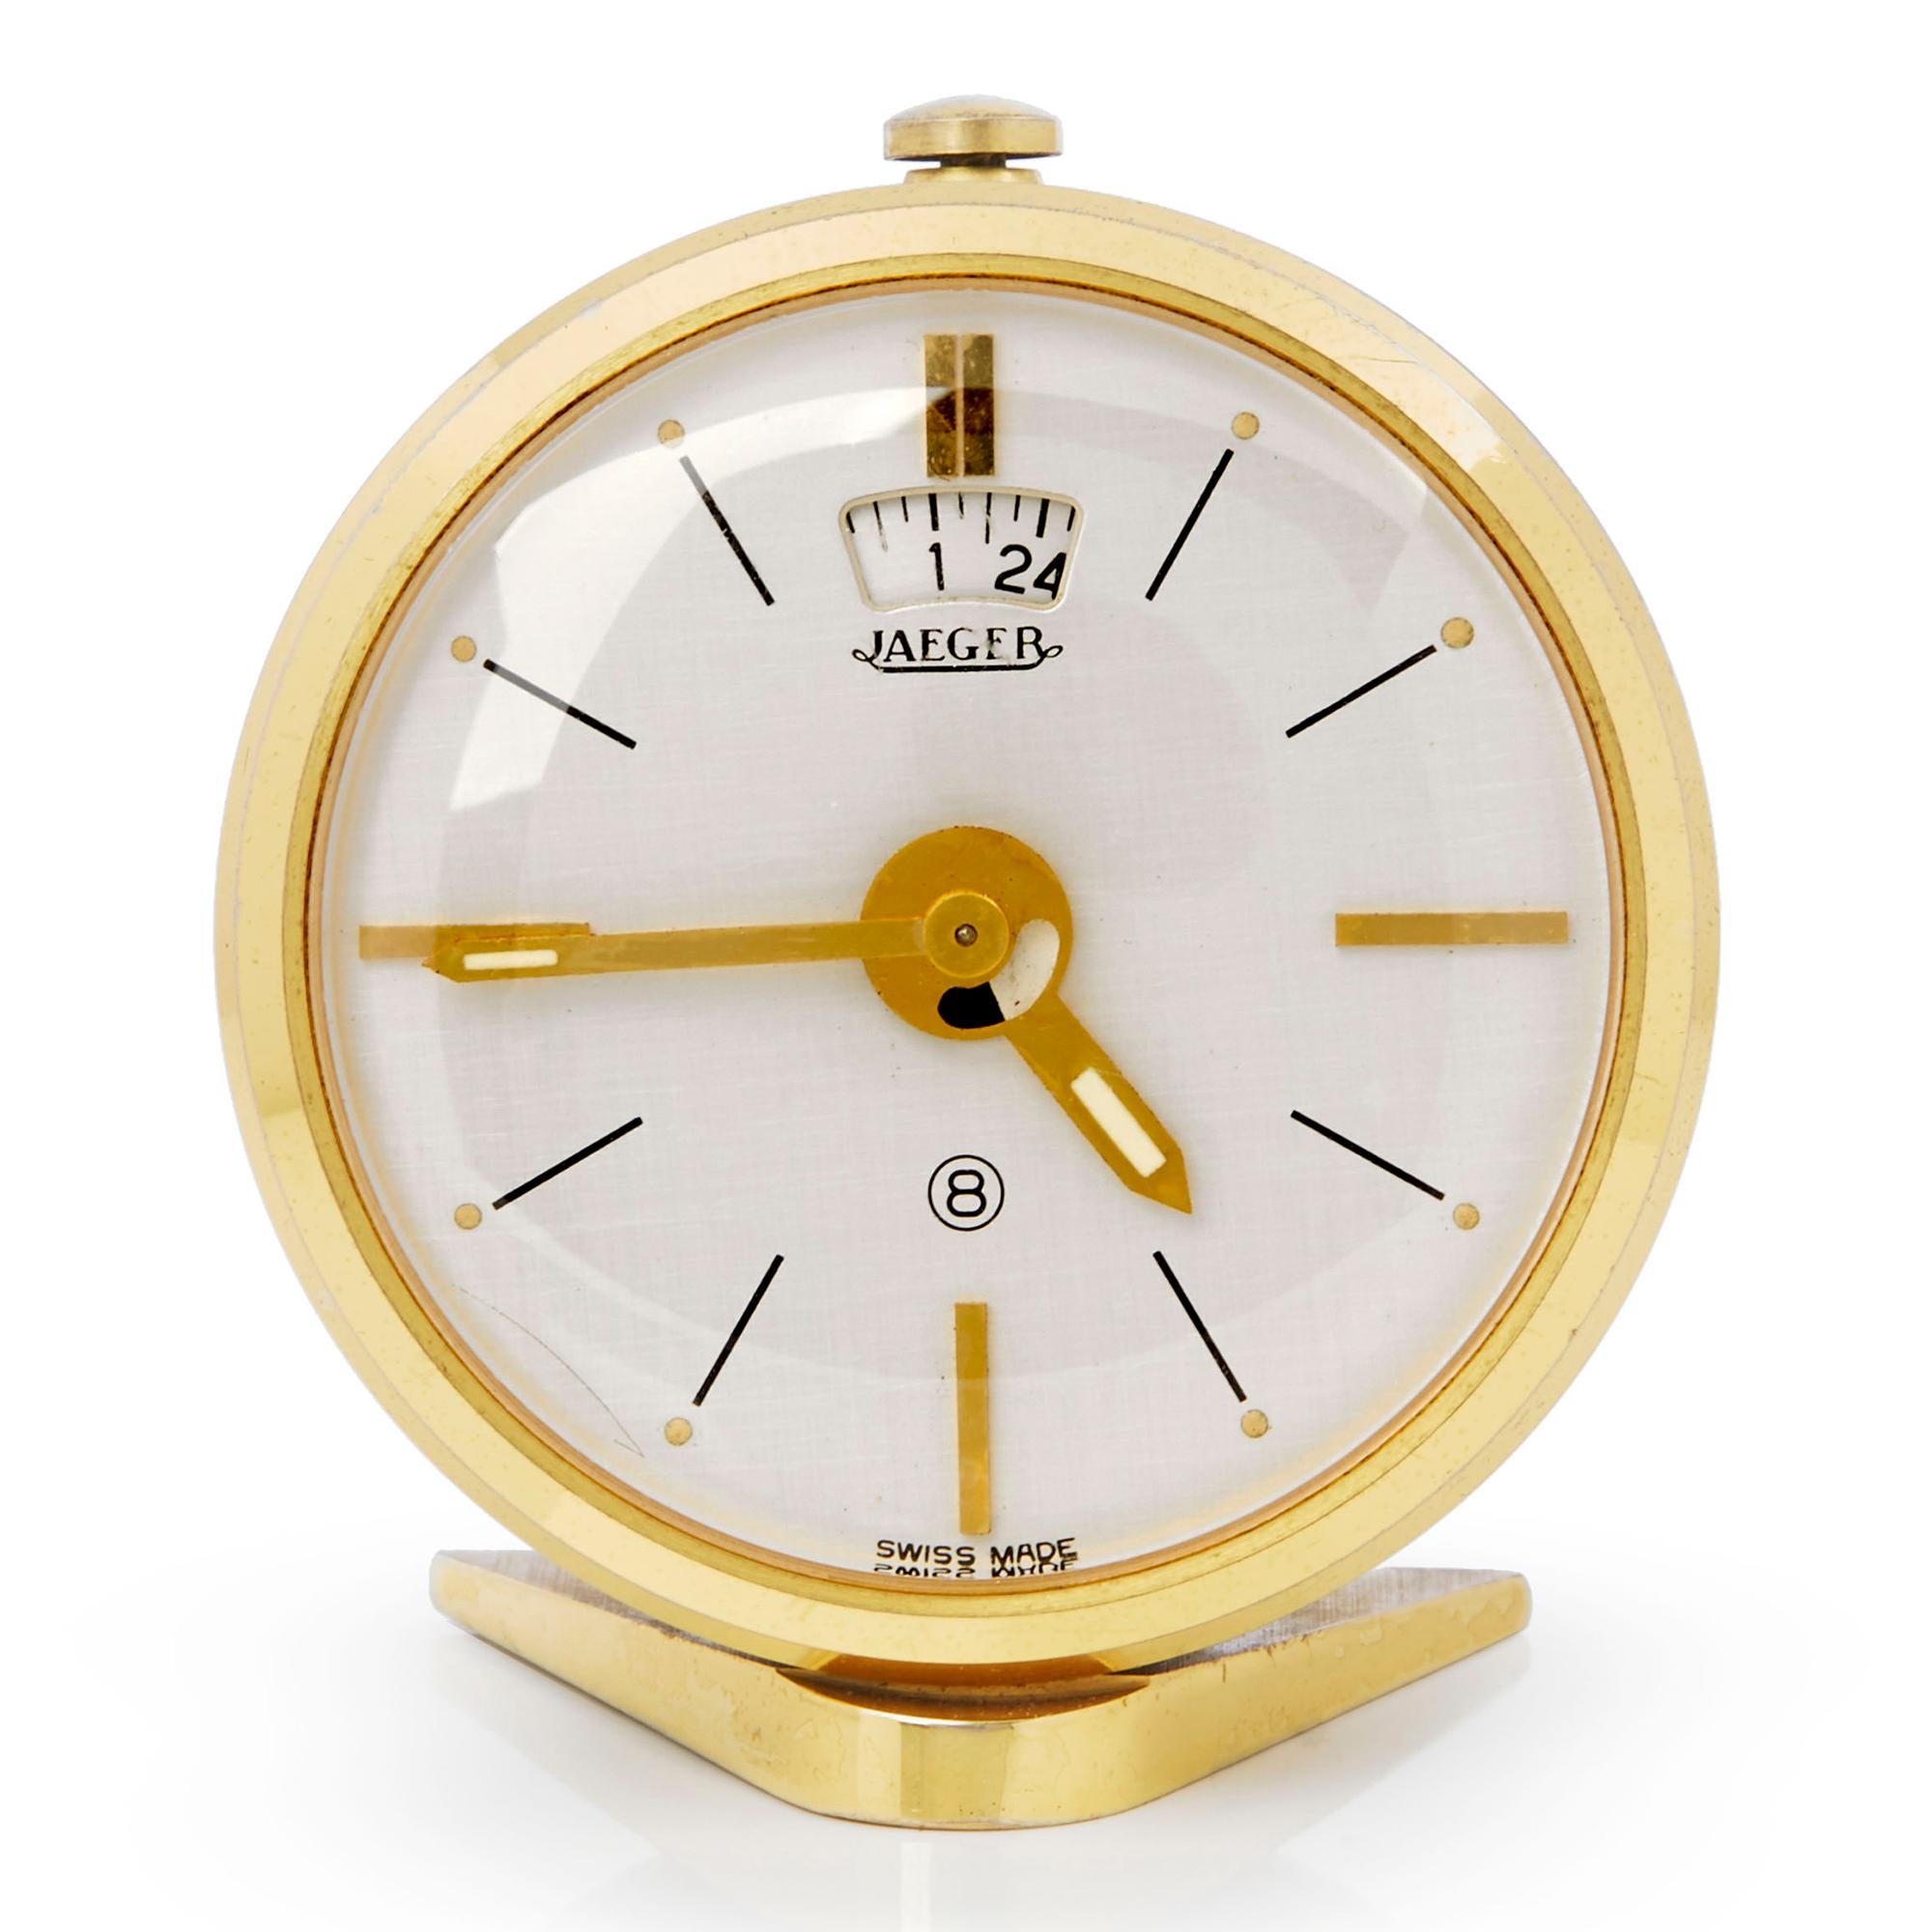 A rare vintage Swiss, Jaeger-LeCoultre 8 day travelling alarm clock, heavily made with with a gold plated brass case with a black enameled casing to the back. The quality clock stands on a 'V' shaped foot and has jewelled watch style Incabloc